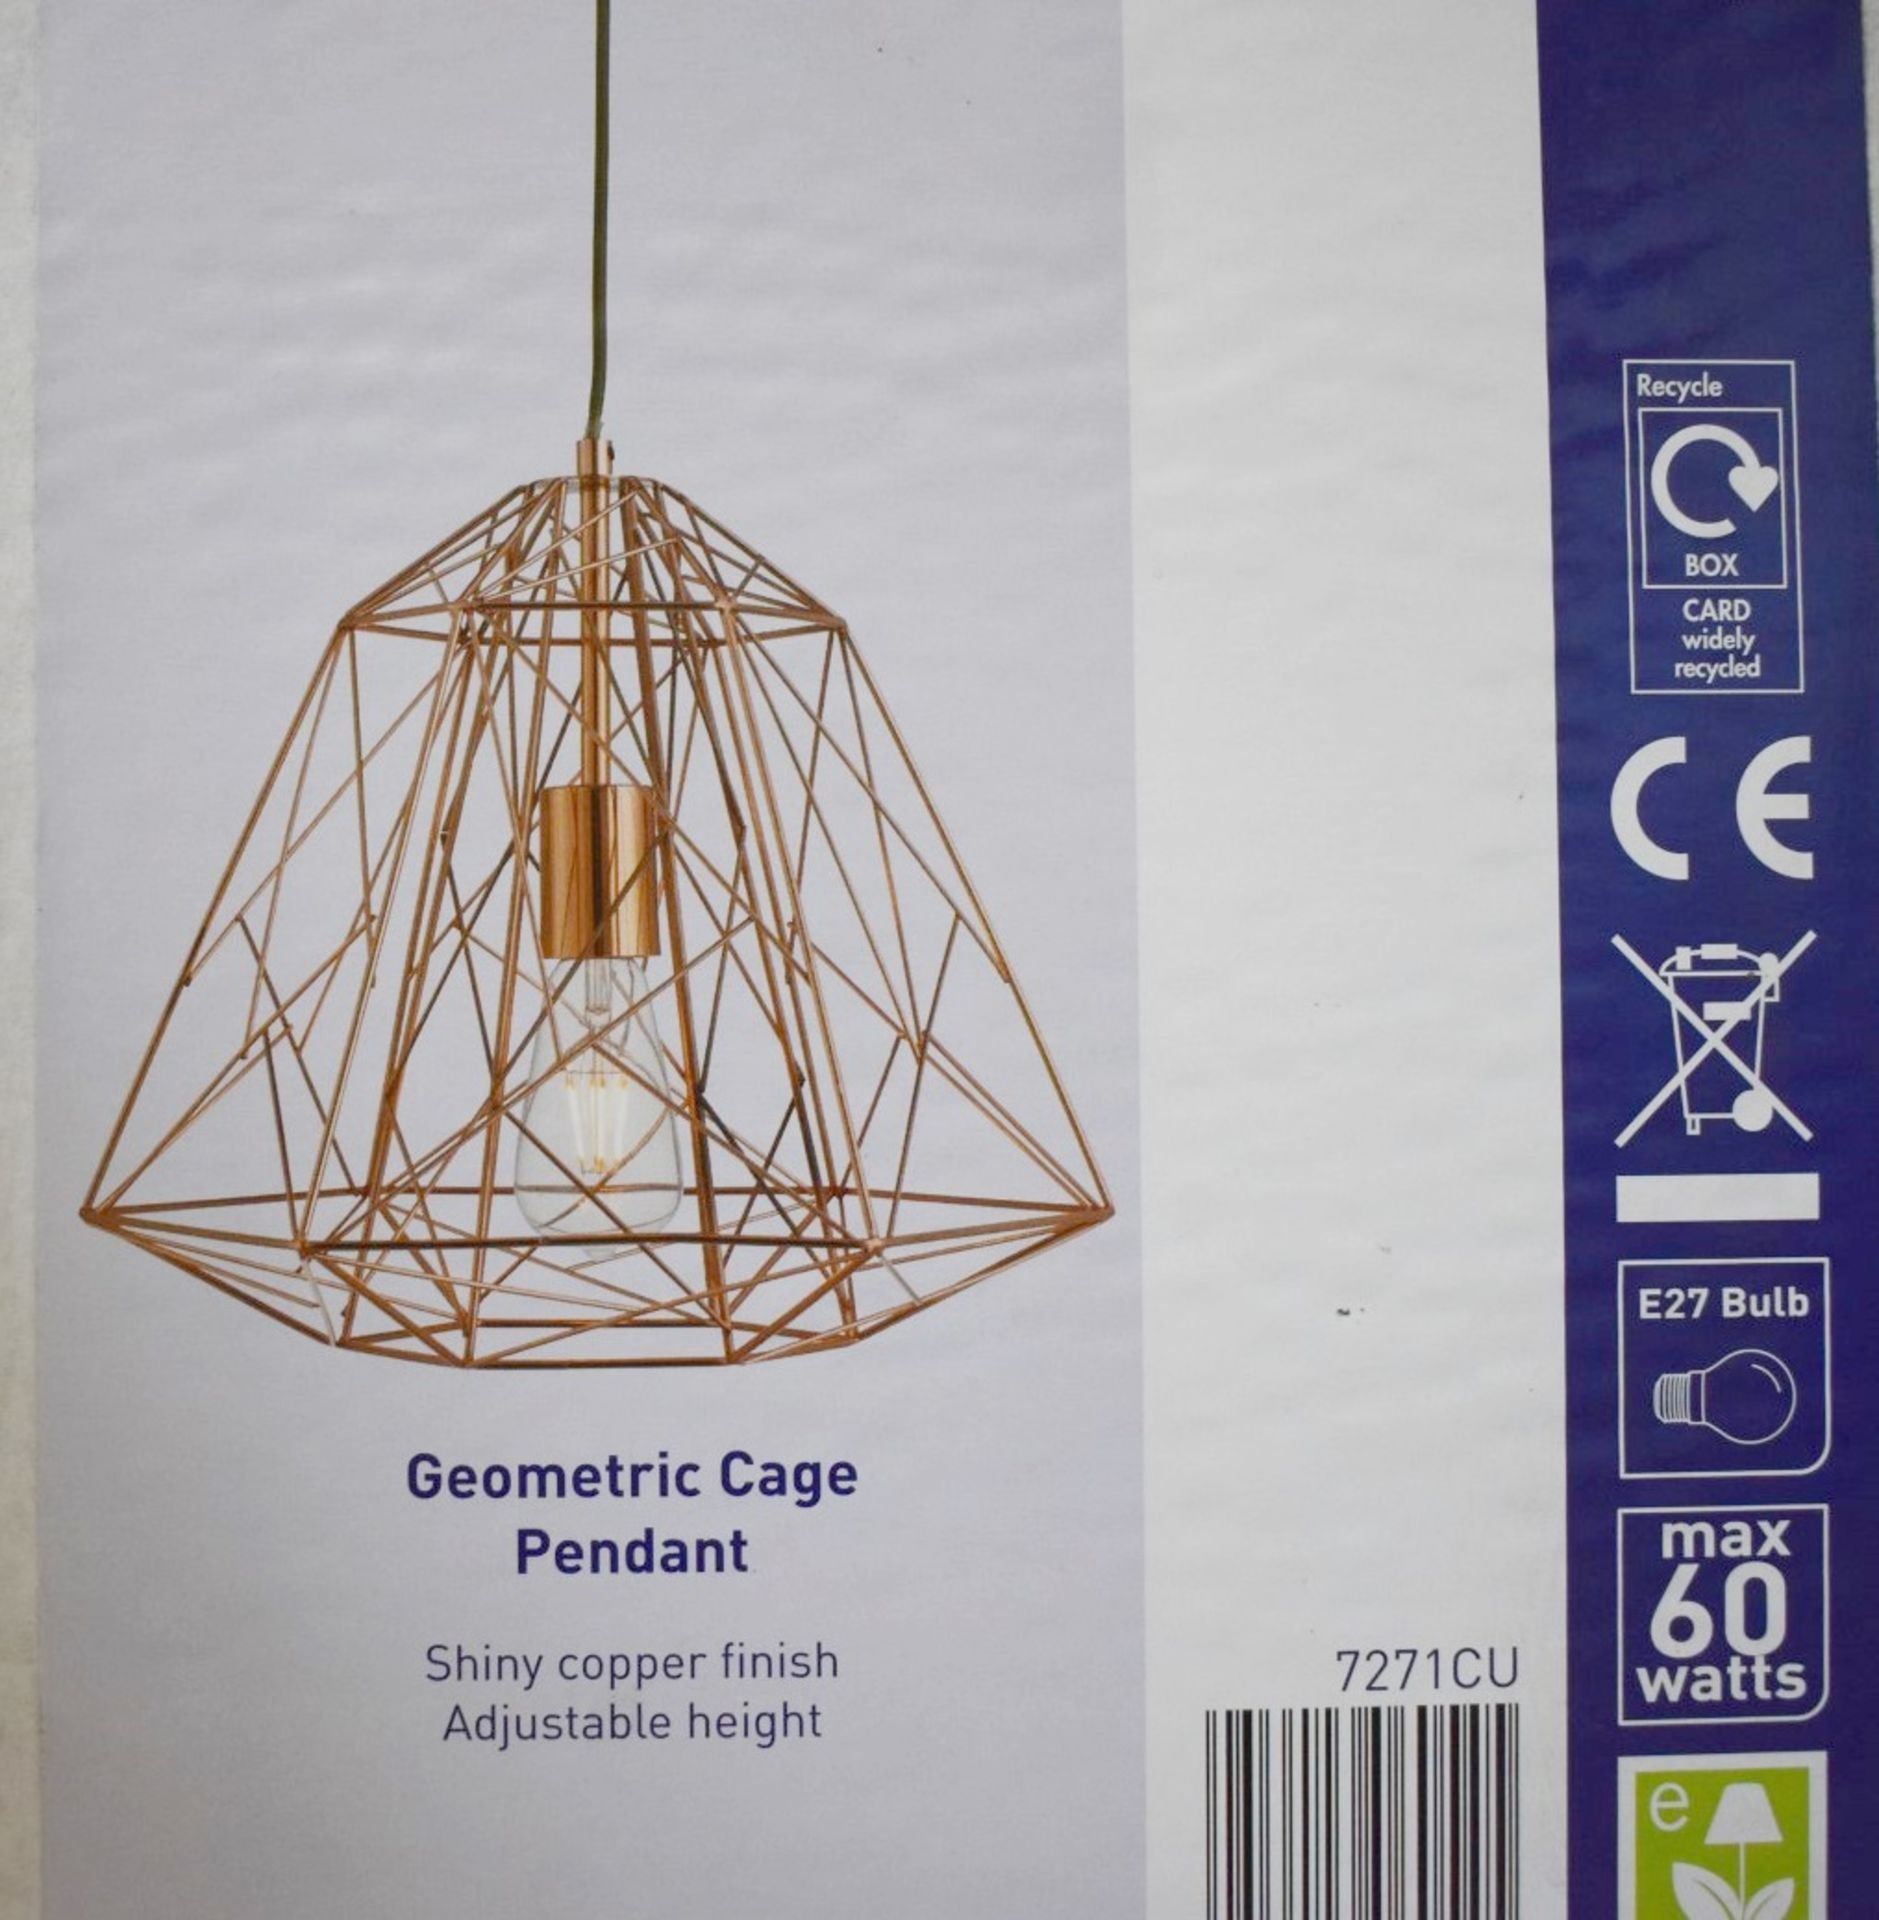 1 x Copper Geometric Cage Frame Pendant Light - New Boxed Stock - CL323 - Ref: 7271CU / PalH - Image 3 of 3